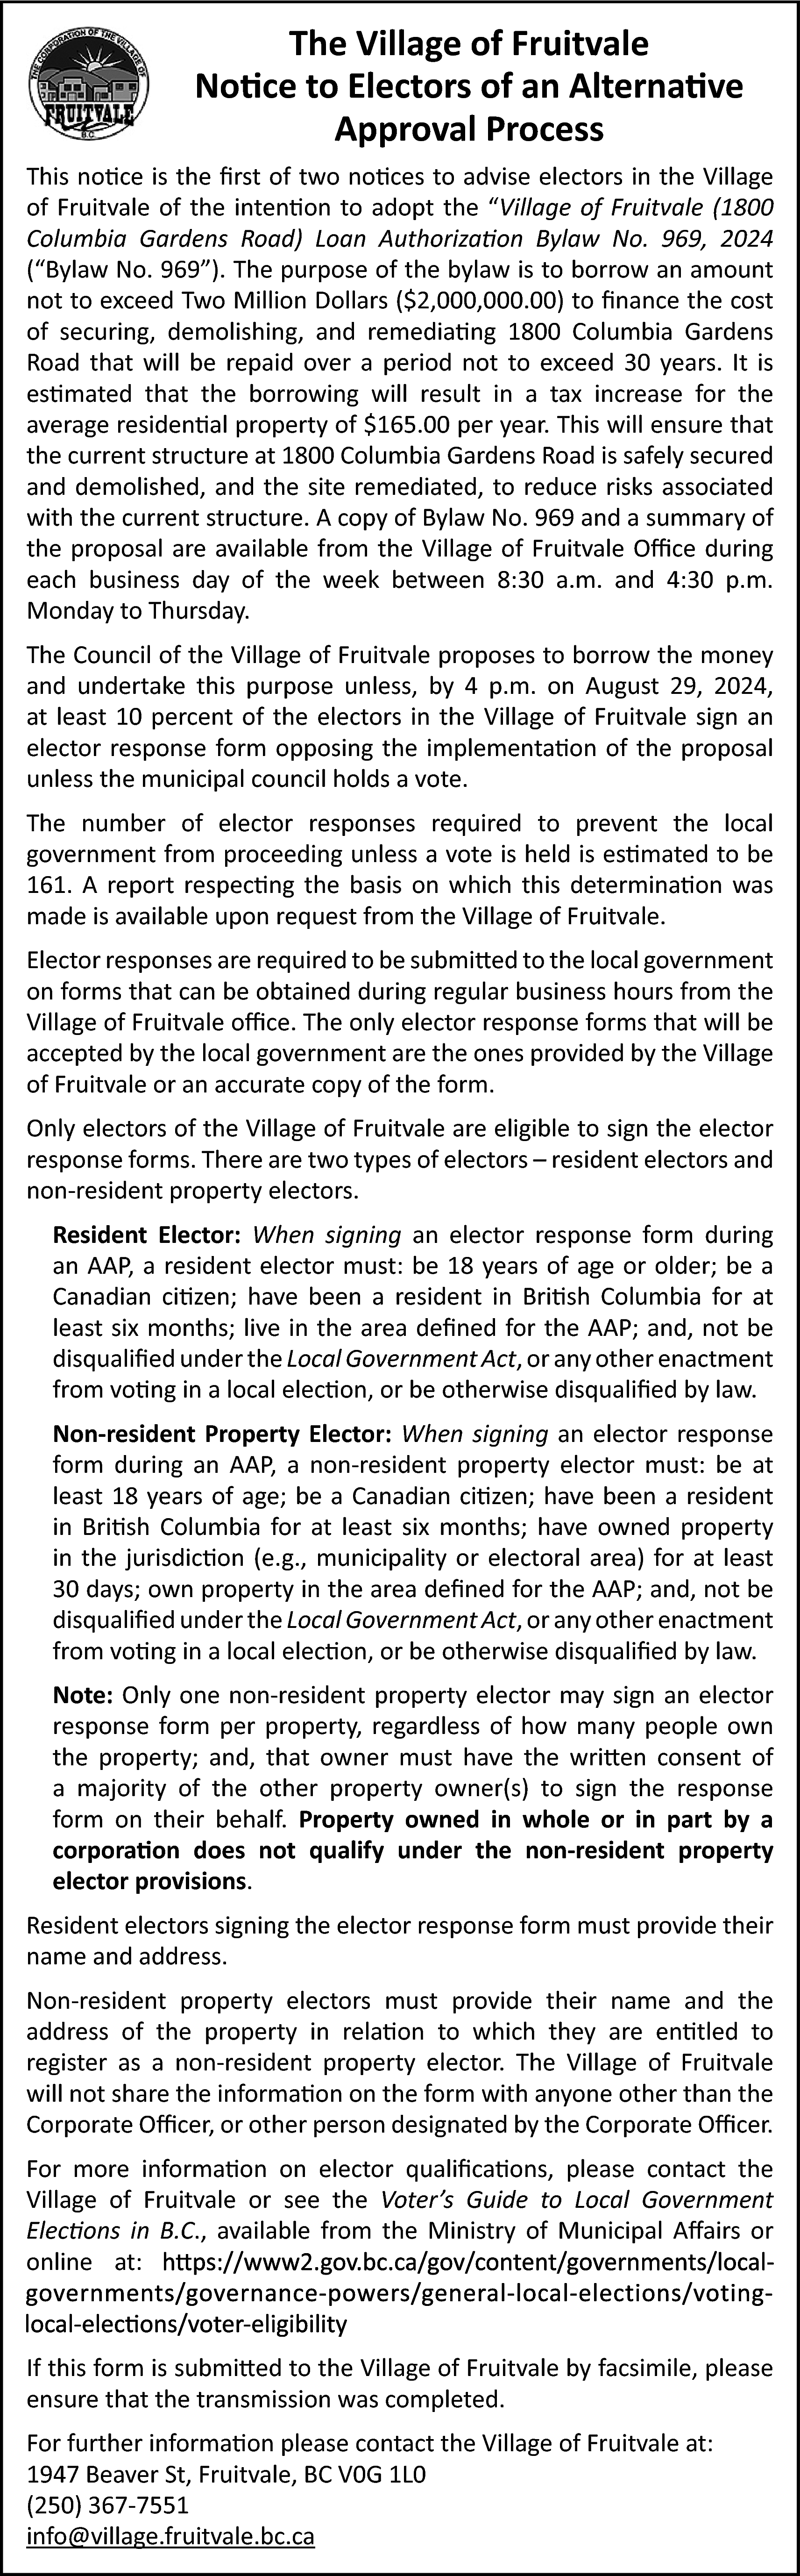 The Village of Fruitvale <br>Notice  The Village of Fruitvale  Notice to Electors of an Alternative  Approval Process  This notice is the first of two notices to advise electors in the Village  of Fruitvale of the intention to adopt the “Village of Fruitvale (1800  Columbia Gardens Road) Loan Authorization Bylaw No. 969, 2024  (“Bylaw No. 969”). The purpose of the bylaw is to borrow an amount  not to exceed Two Million Dollars ($2,000,000.00) to finance the cost  of securing, demolishing, and remediating 1800 Columbia Gardens  Road that will be repaid over a period not to exceed 30 years. It is  estimated that the borrowing will result in a tax increase for the  average residential property of $165.00 per year. This will ensure that  the current structure at 1800 Columbia Gardens Road is safely secured  and demolished, and the site remediated, to reduce risks associated  with the current structure. A copy of Bylaw No. 969 and a summary of  the proposal are available from the Village of Fruitvale Office during  each business day of the week between 8:30 a.m. and 4:30 p.m.  Monday to Thursday.  The Council of the Village of Fruitvale proposes to borrow the money  and undertake this purpose unless, by 4 p.m. on August 29, 2024,  at least 10 percent of the electors in the Village of Fruitvale sign an  elector response form opposing the implementation of the proposal  unless the municipal council holds a vote.  The number of elector responses required to prevent the local  government from proceeding unless a vote is held is estimated to be  161. A report respecting the basis on which this determination was  made is available upon request from the Village of Fruitvale.  Elector responses are required to be submitted to the local government  on forms that can be obtained during regular business hours from the  Village of Fruitvale office. The only elector response forms that will be  accepted by the local government are the ones provided by the Village  of Fruitvale or an accurate copy of the form.  Only electors of the Village of Fruitvale are eligible to sign the elector  response forms. There are two types of electors – resident electors and  non-resident property electors.  Resident Elector: When signing an elector response form during  an AAP, a resident elector must: be 18 years of age or older; be a  Canadian citizen; have been a resident in British Columbia for at  least six months; live in the area defined for the AAP; and, not be  disqualified under the Local Government Act, or any other enactment  from voting in a local election, or be otherwise disqualified by law.  Non-resident Property Elector: When signing an elector response  form during an AAP, a non-resident property elector must: be at  least 18 years of age; be a Canadian citizen; have been a resident  in British Columbia for at least six months; have owned property  in the jurisdiction (e.g., municipality or electoral area) for at least  30 days; own property in the area defined for the AAP; and, not be  disqualified under the Local Government Act, or any other enactment  from voting in a local election, or be otherwise disqualified by law.  Note: Only one non-resident property elector may sign an elector  response form per property, regardless of how many people own  the property; and, that owner must have the written consent of  a majority of the other property owner(s) to sign the response  form on their behalf. Property owned in whole or in part by a  corporation does not qualify under the non-resident property  elector provisions.  Resident electors signing the elector response form must provide their  name and address.  Non-resident property electors must provide their name and the  address of the property in relation to which they are entitled to  register as a non-resident property elector. The Village of Fruitvale  will not share the information on the form with anyone other than the  Corporate Officer, or other person designated by the Corporate Officer.  For more information on elector qualifications, please contact the  Village of Fruitvale or see the Voter’s Guide to Local Government  Elections in B.C., available from the Ministry of Municipal Affairs or  online at:  https://www2.gov.bc.ca/gov/content/governments/local-governments/governance-powers/general-local-elections/voting-local-elections/voter-eligibility    If this form is submitted to the Village of Fruitvale by facsimile, please  ensure that the transmission was completed.  For further information please contact the Village of Fruitvale at:  1947 Beaver St, Fruitvale, BC V0G 1L0  (250) 367-7551  info@village.fruitvale.bc.ca    